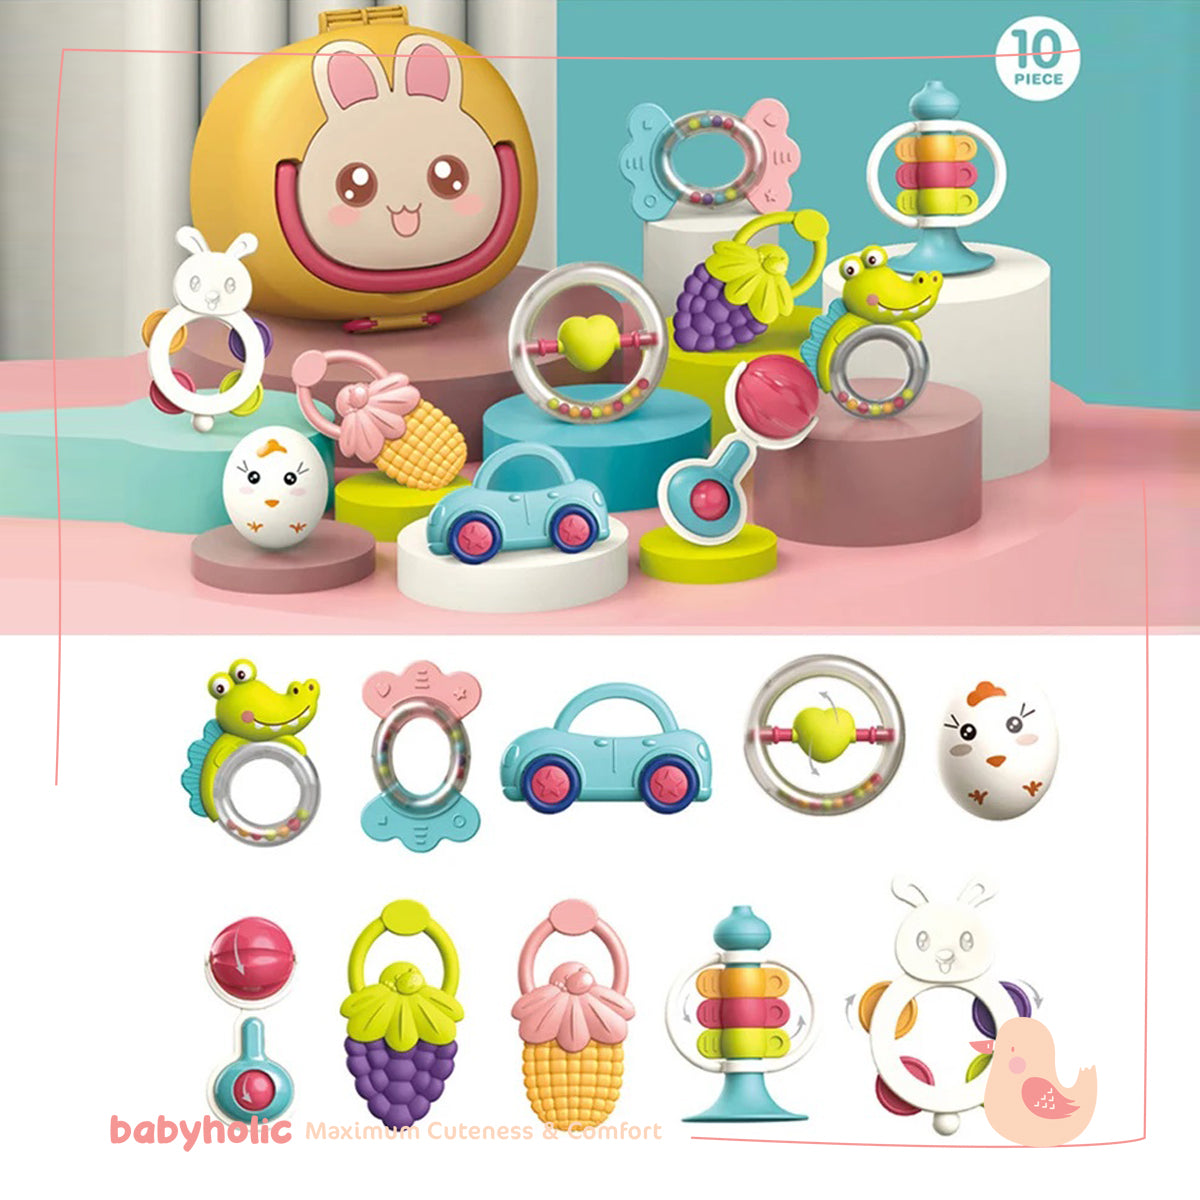 Baby Rattle Toy Set